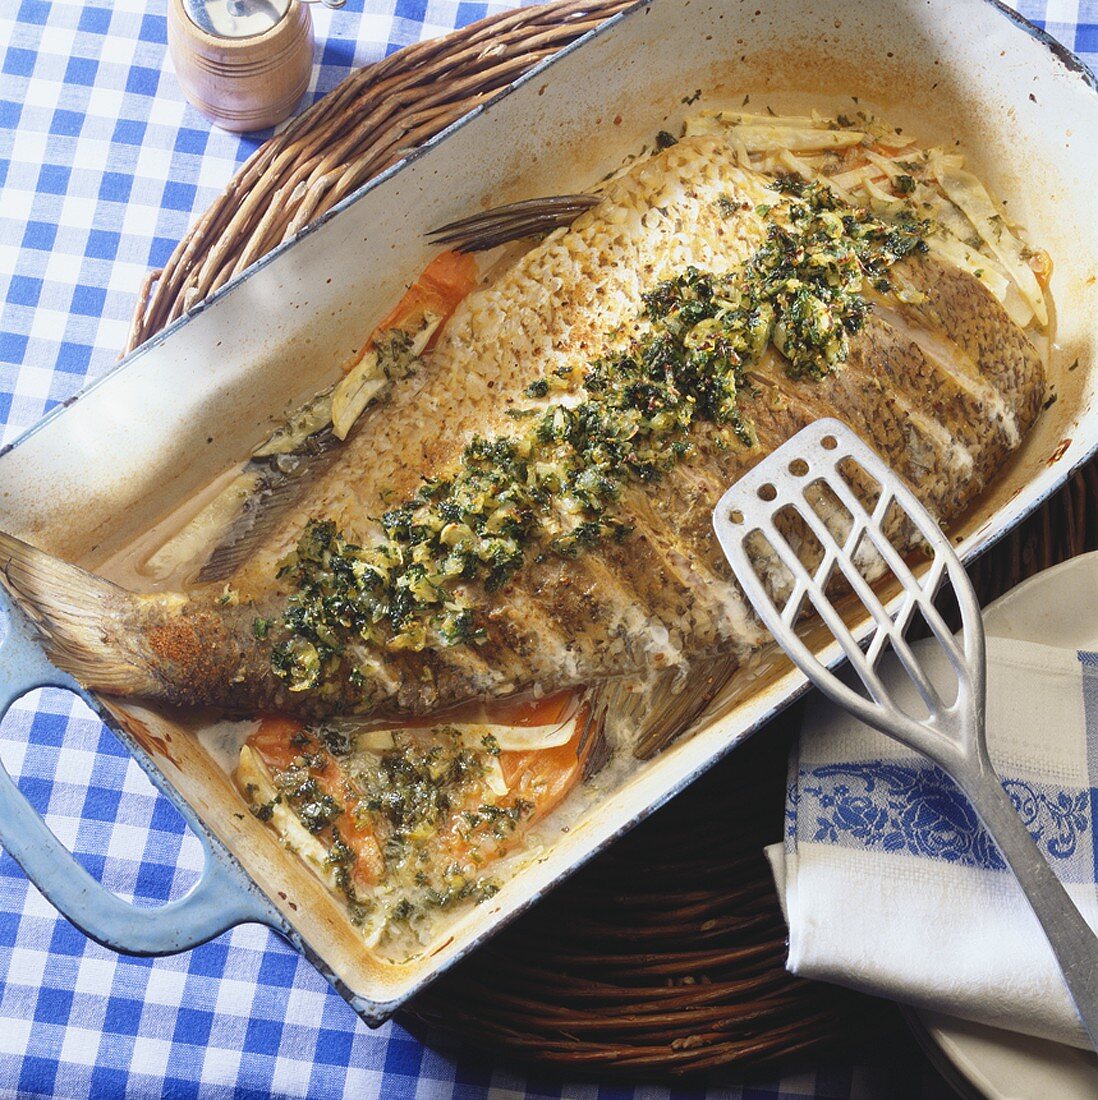 Baked bream with parsley